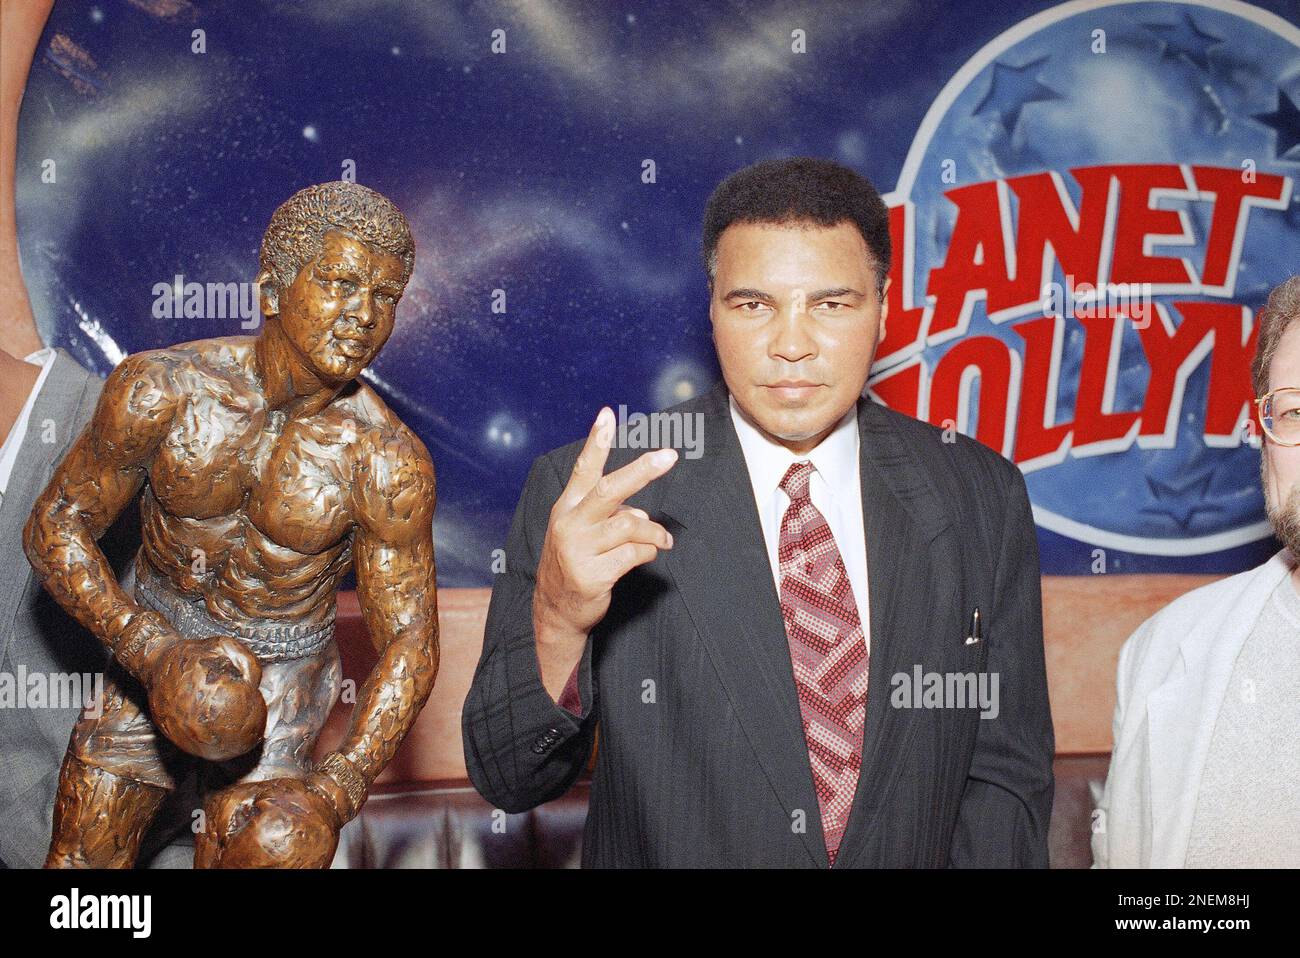 Muhammad Ali, one of the world?s greatest sports heroes, jestures